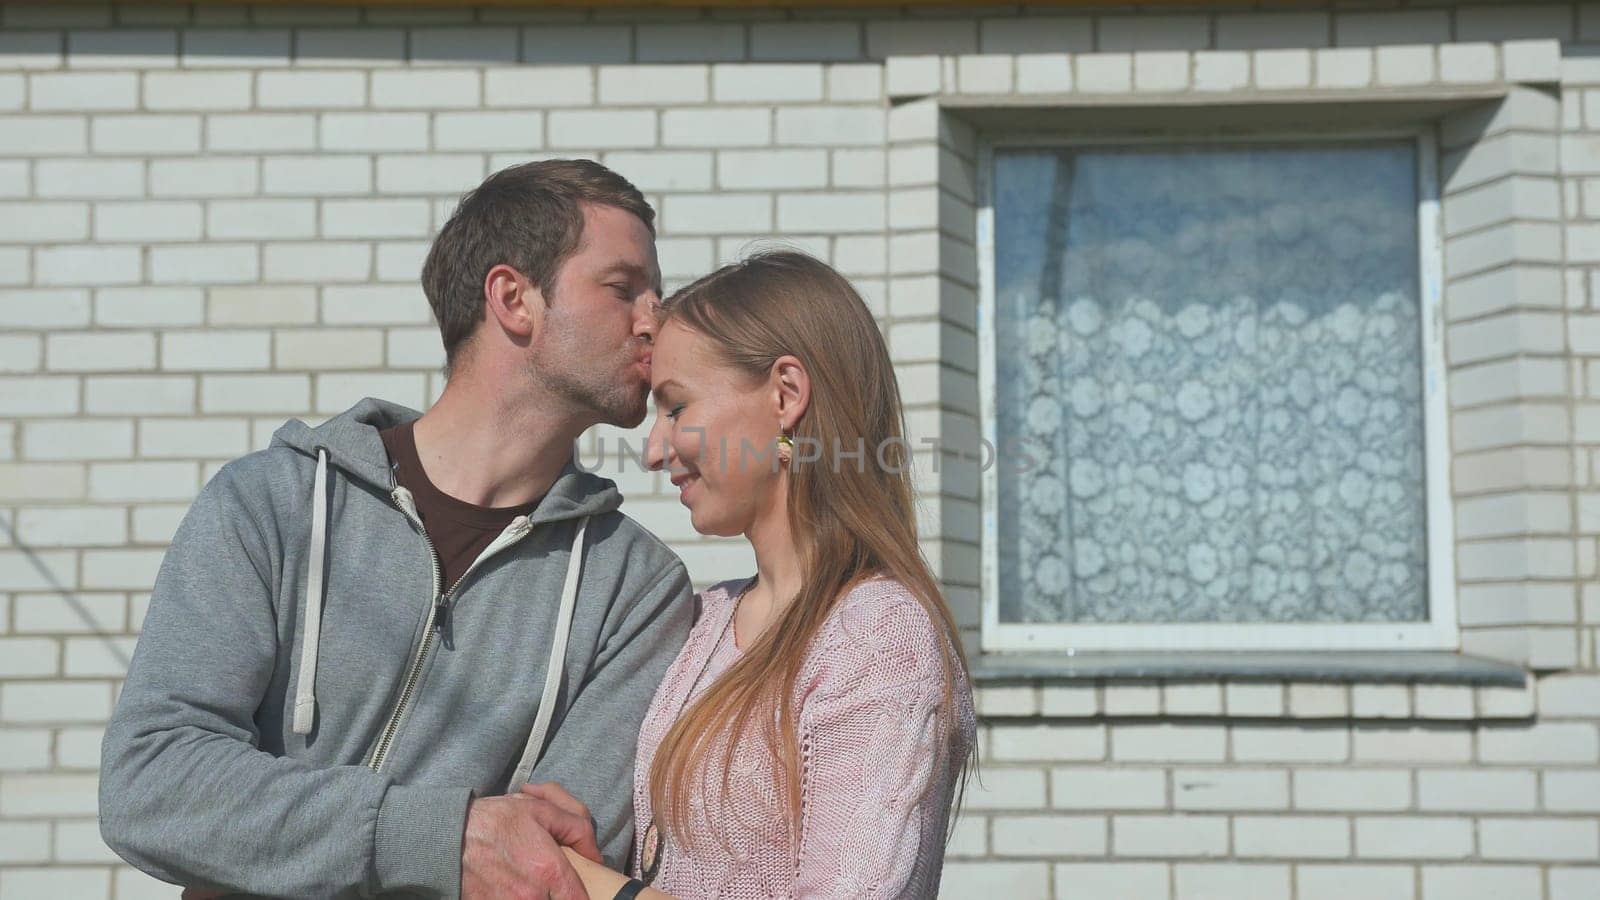 A loving husband kisses his wife in front of his house